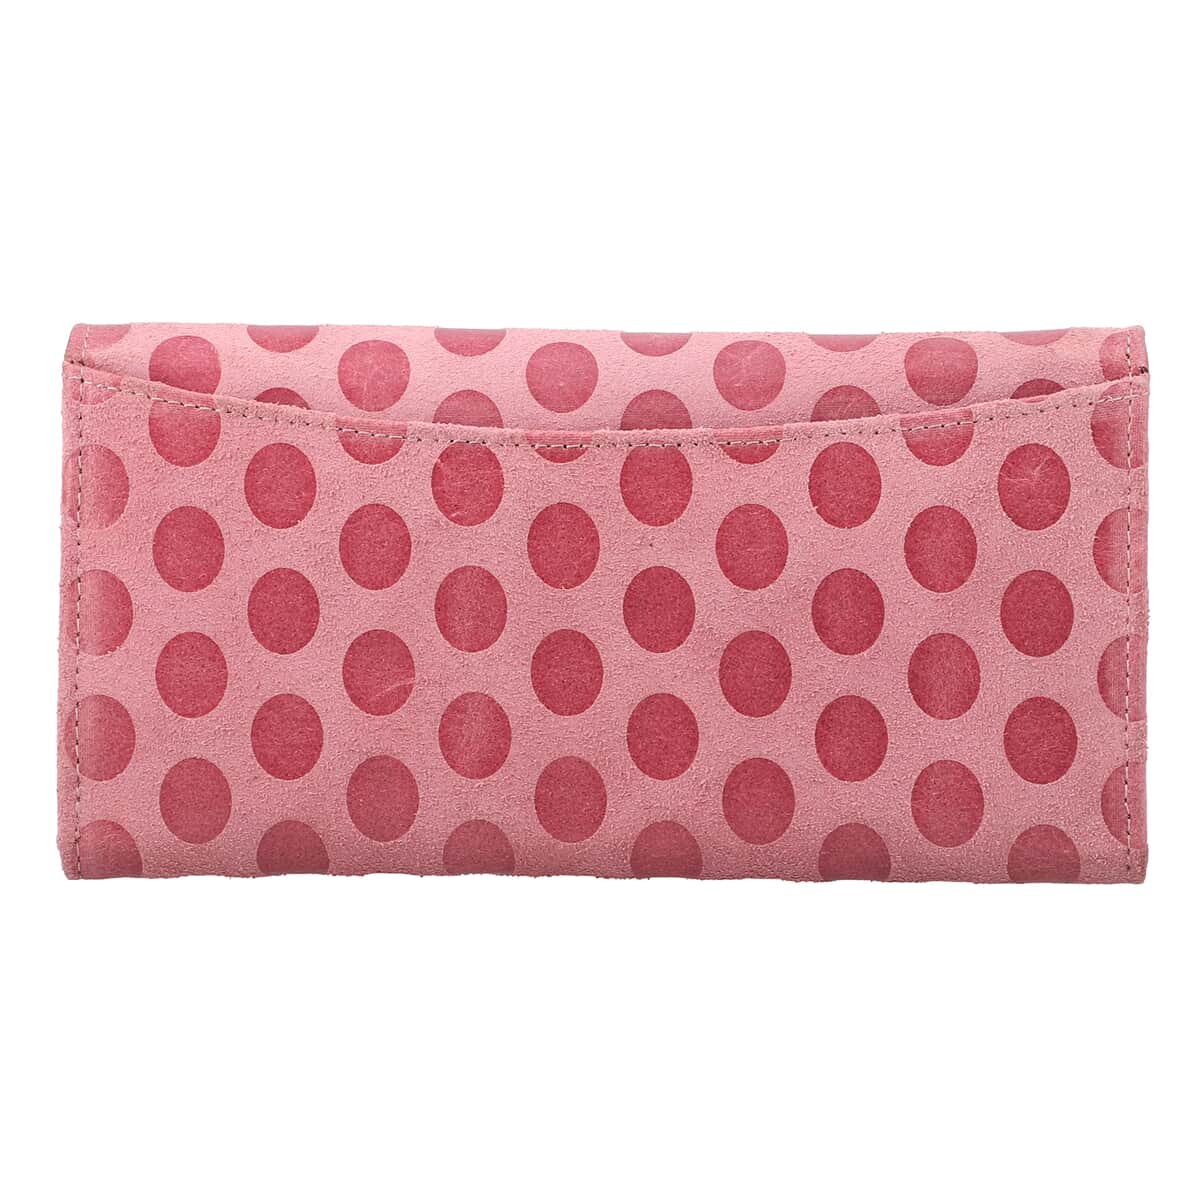 UNION CODE Light Pink Genuine Leather RFID Women's Wallet image number 5